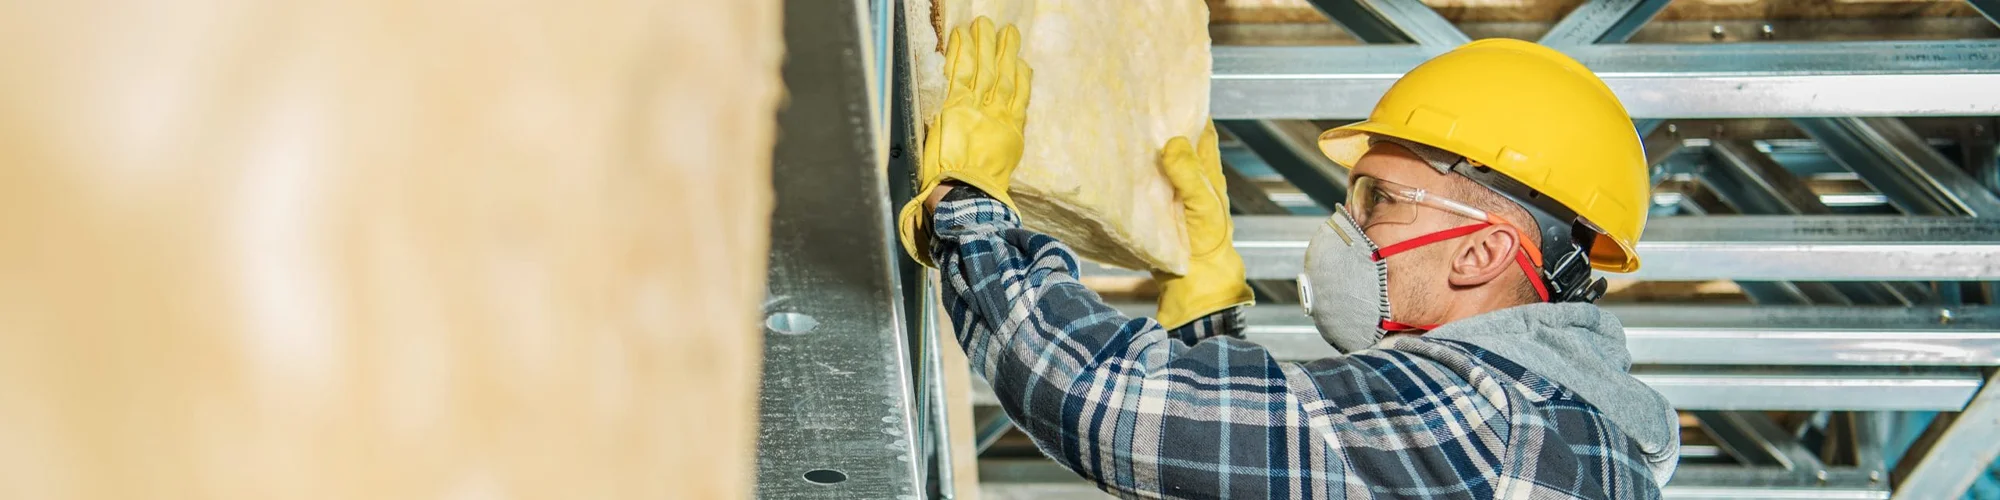 worker removing insulation